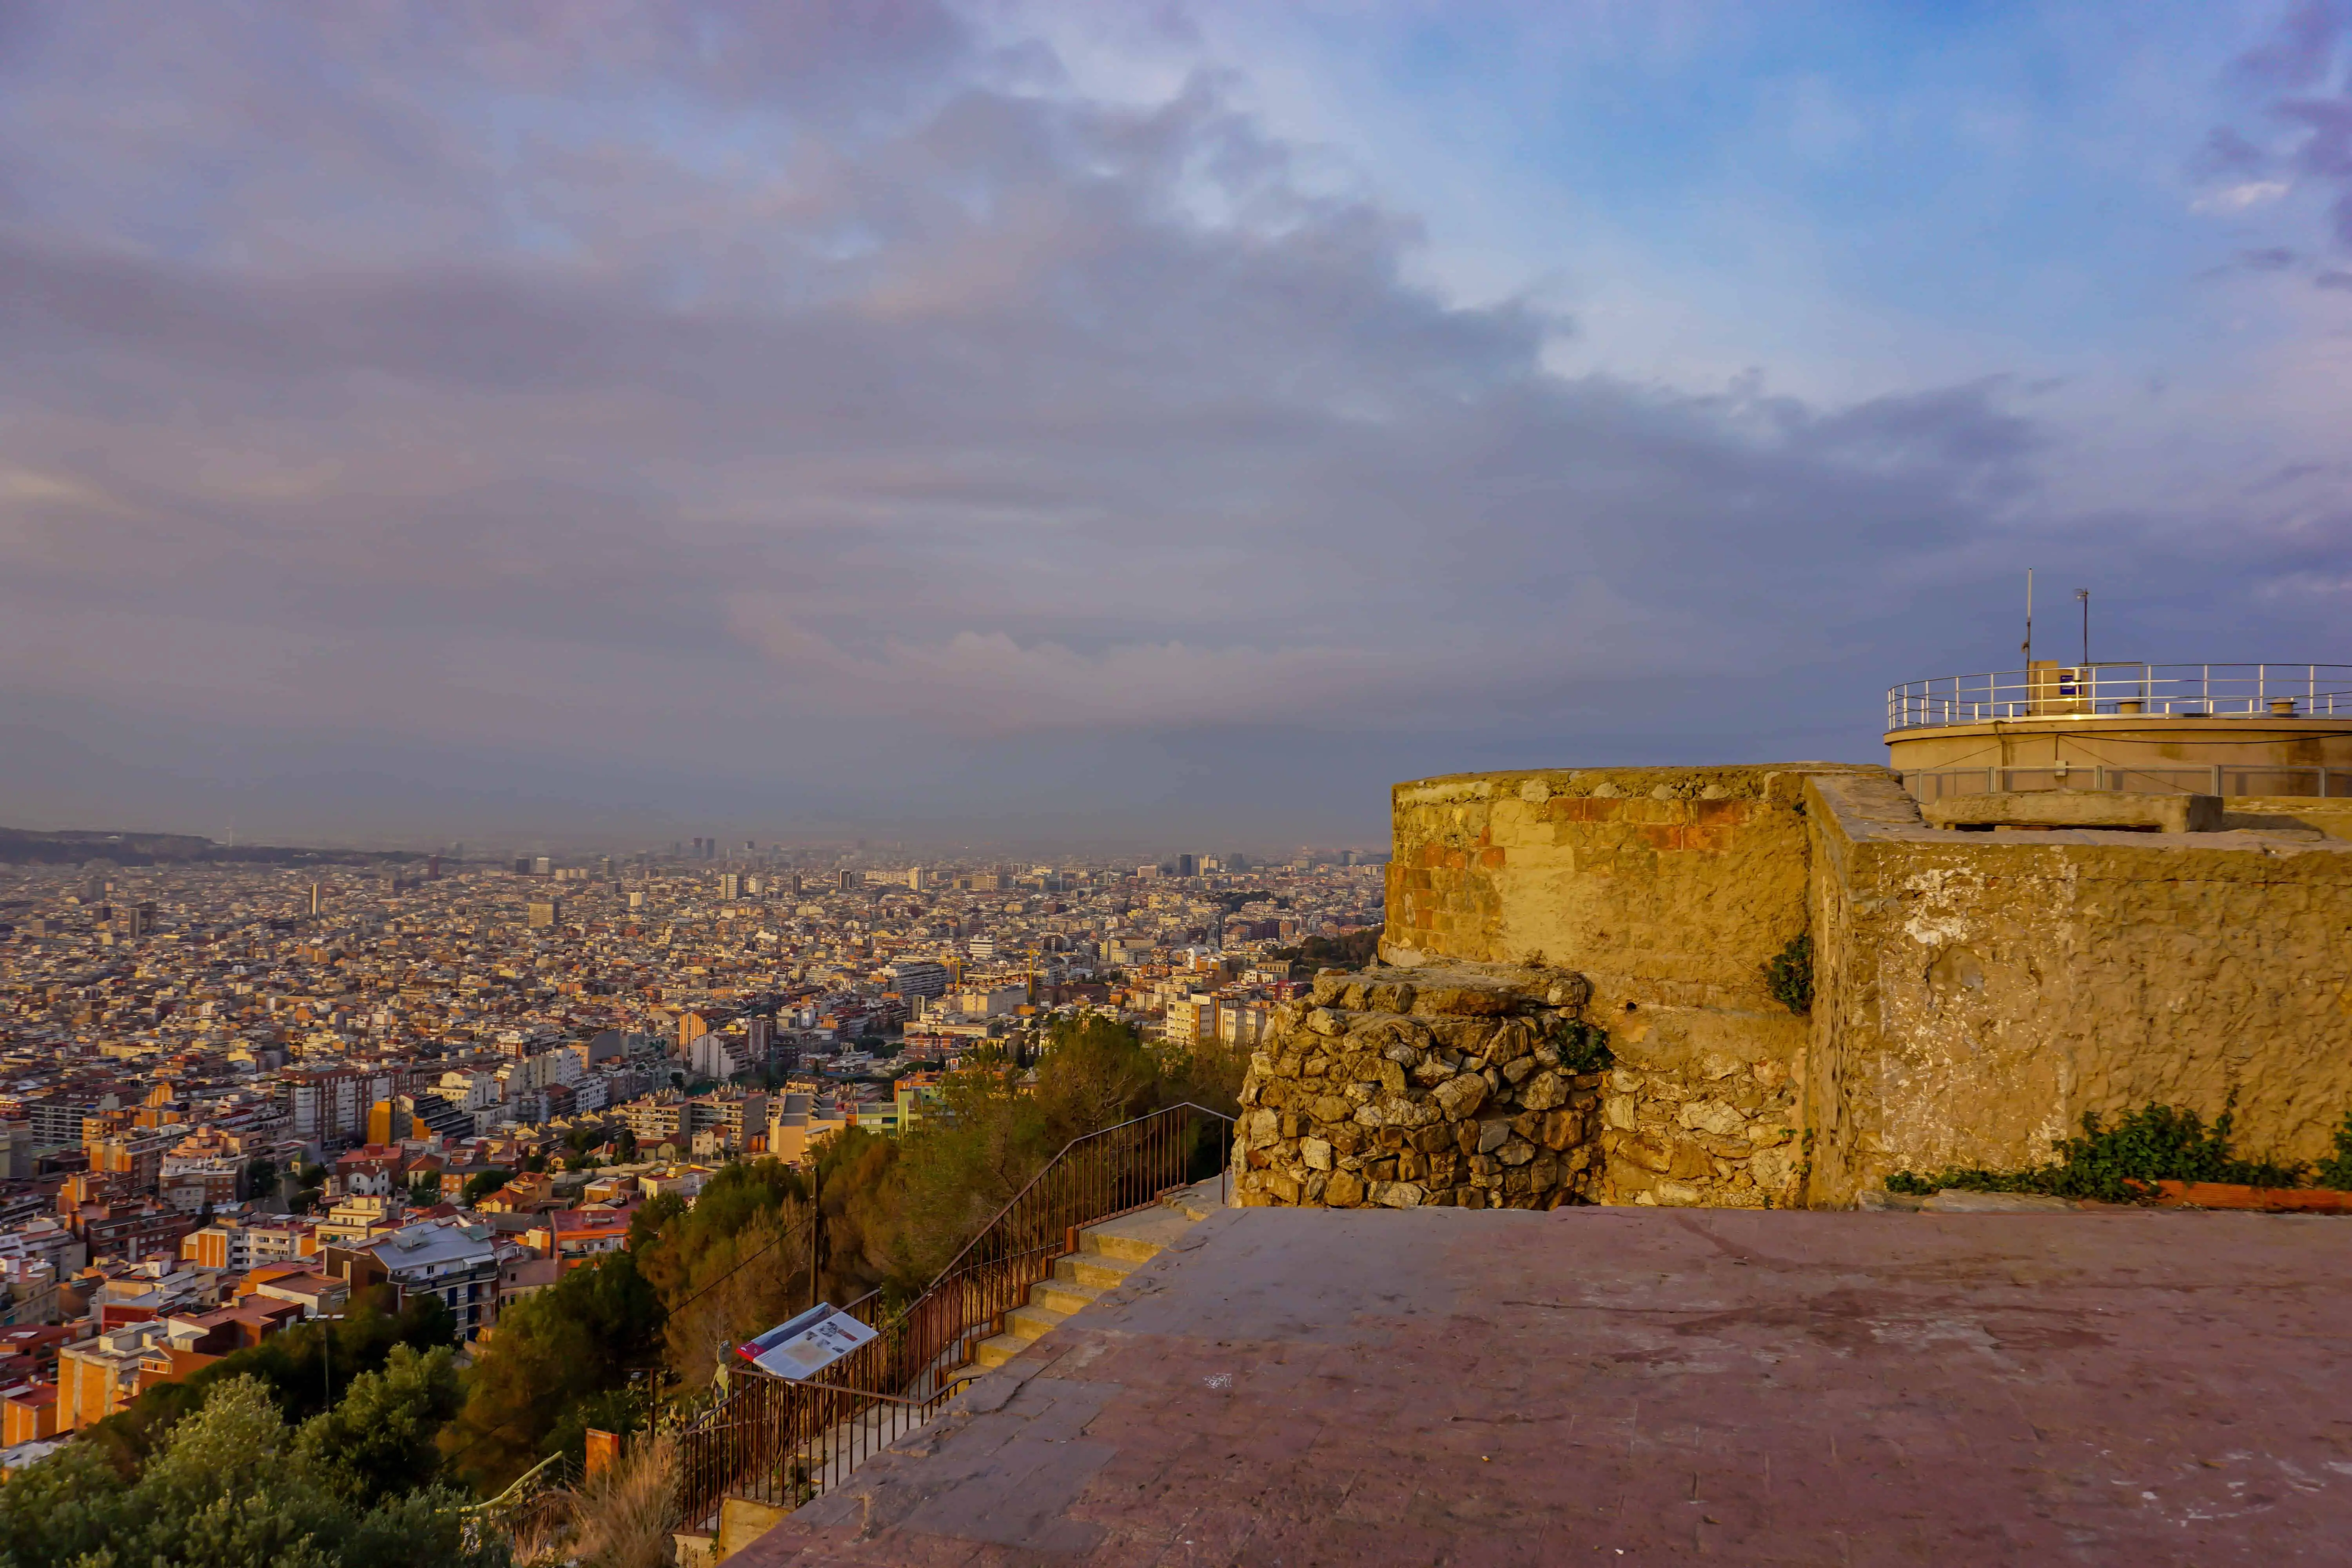 The Bunkers Of Caramel - A View Of The City Of Barcelona